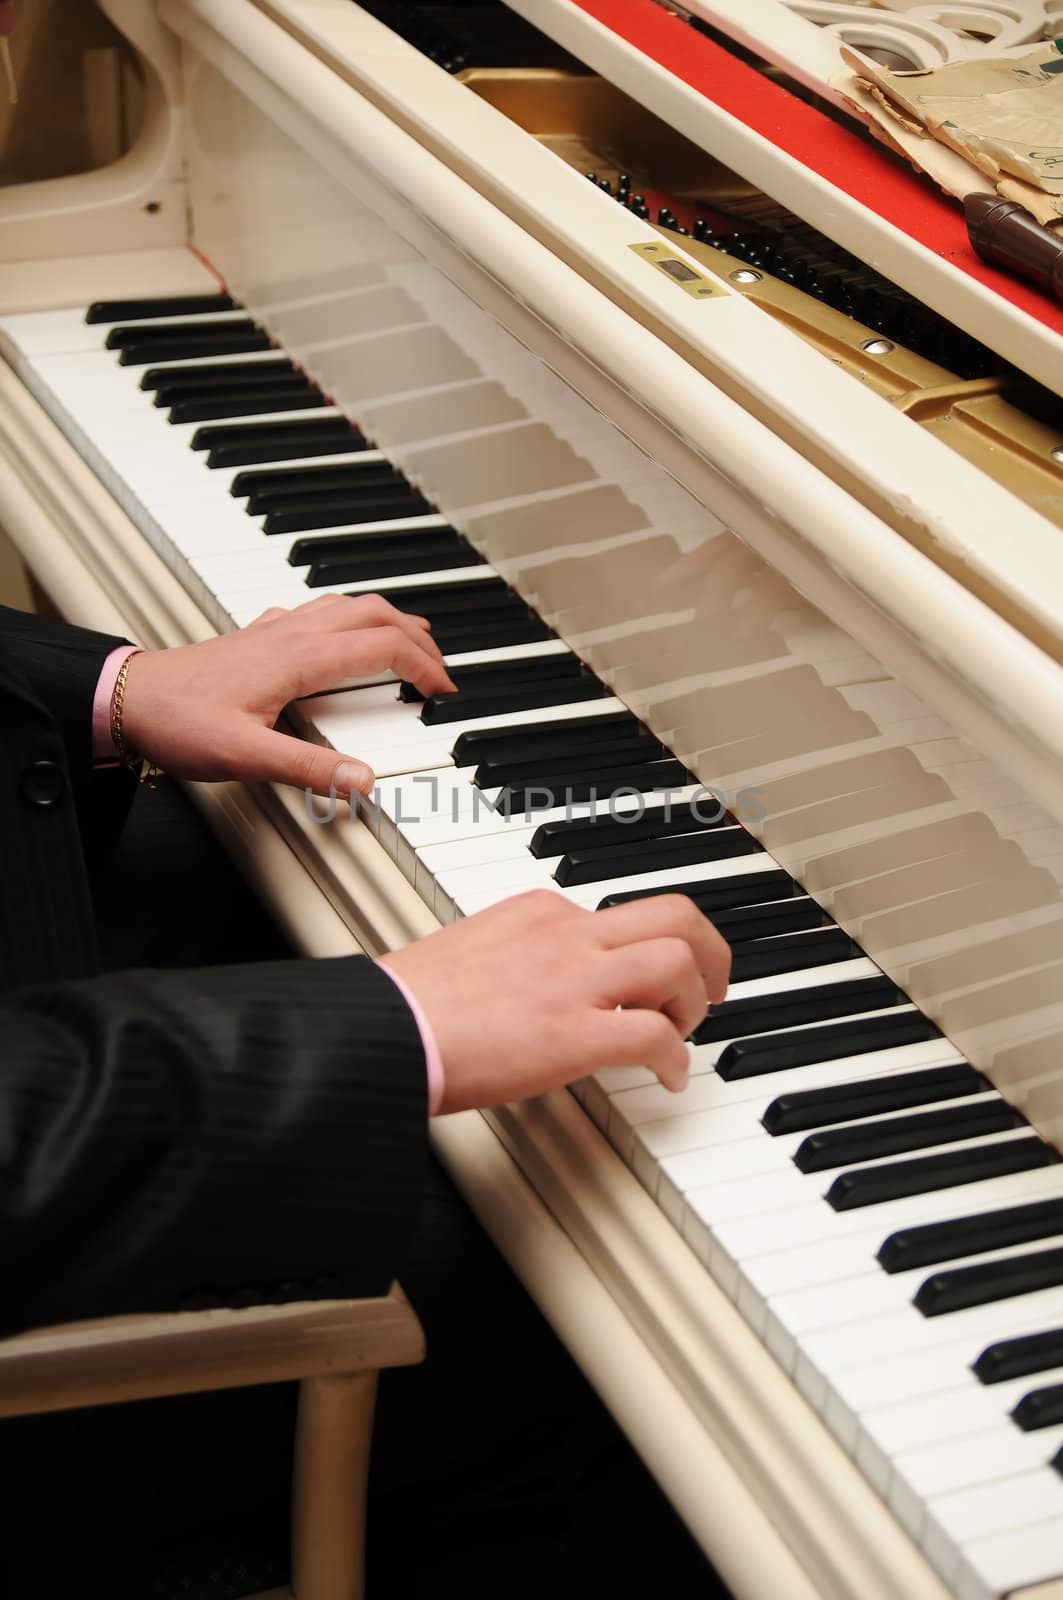 Man's hands playing piano